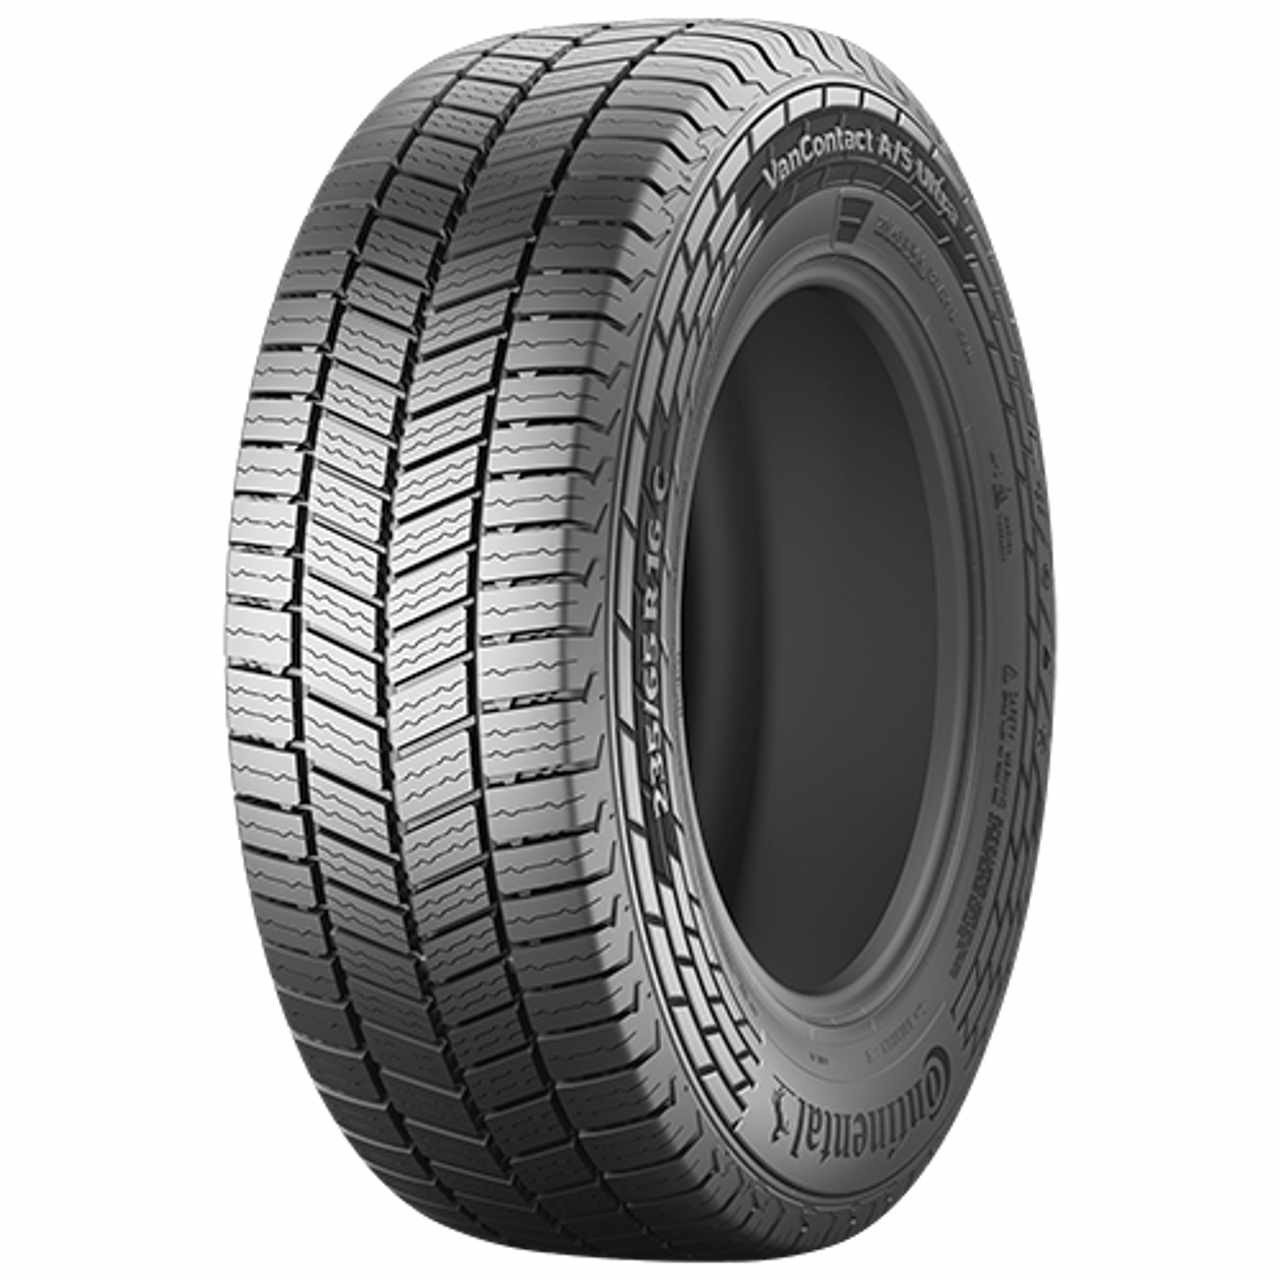 CONTINENTAL VANCONTACT A/S ULTRA 205/70R15C 106R BSW von Continental